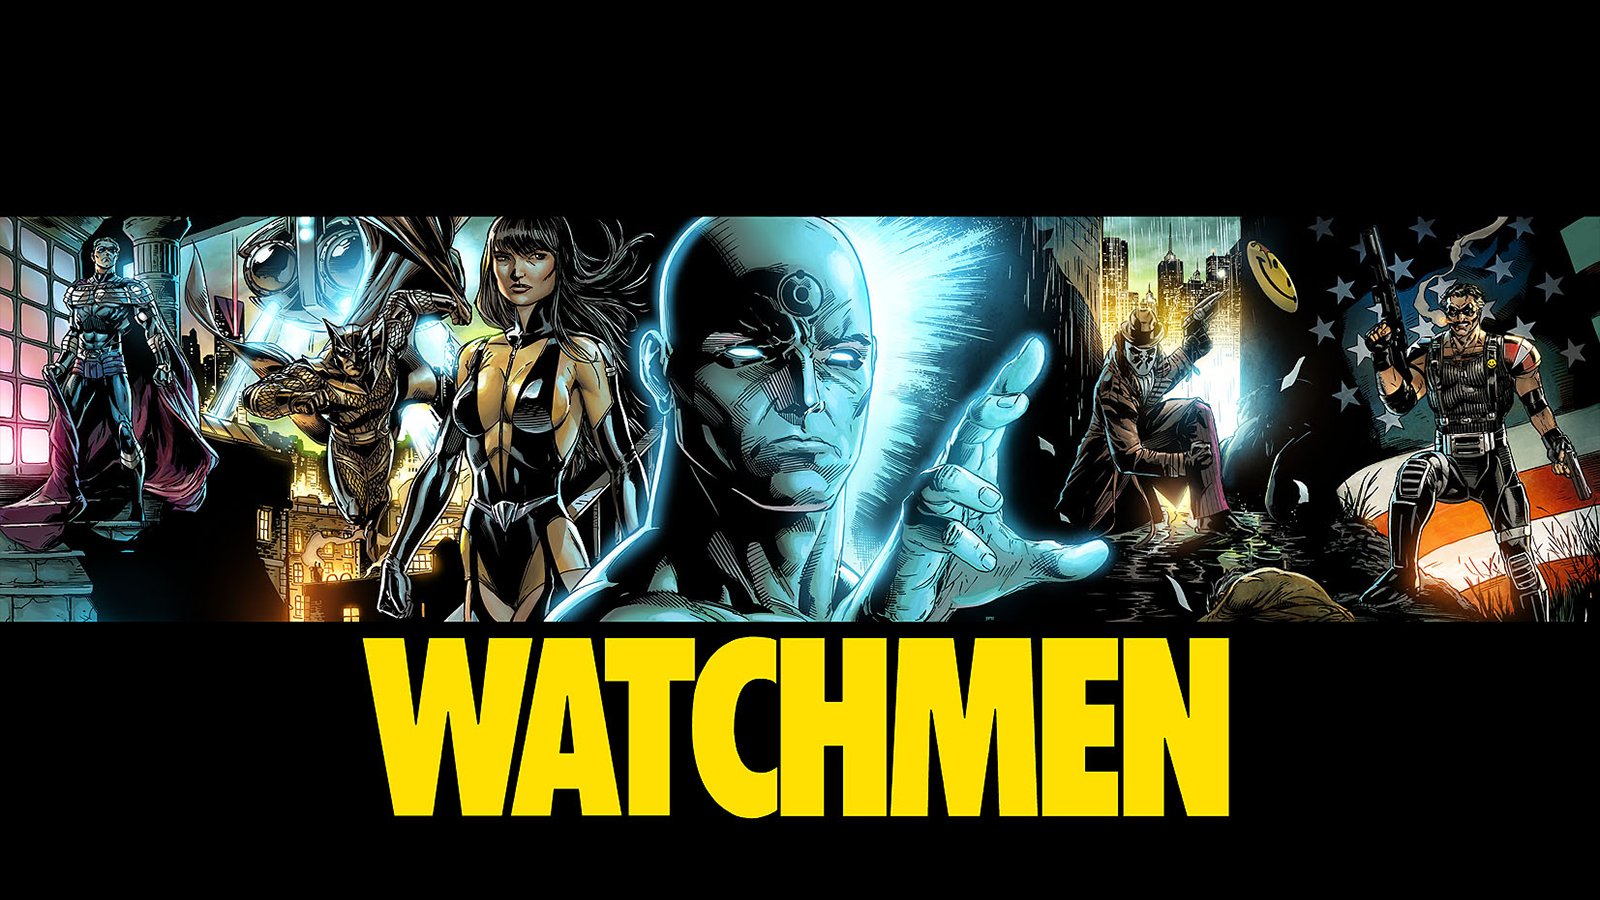 watchmen wallpaper hd,action adventure game,movie,poster,fictional character,games